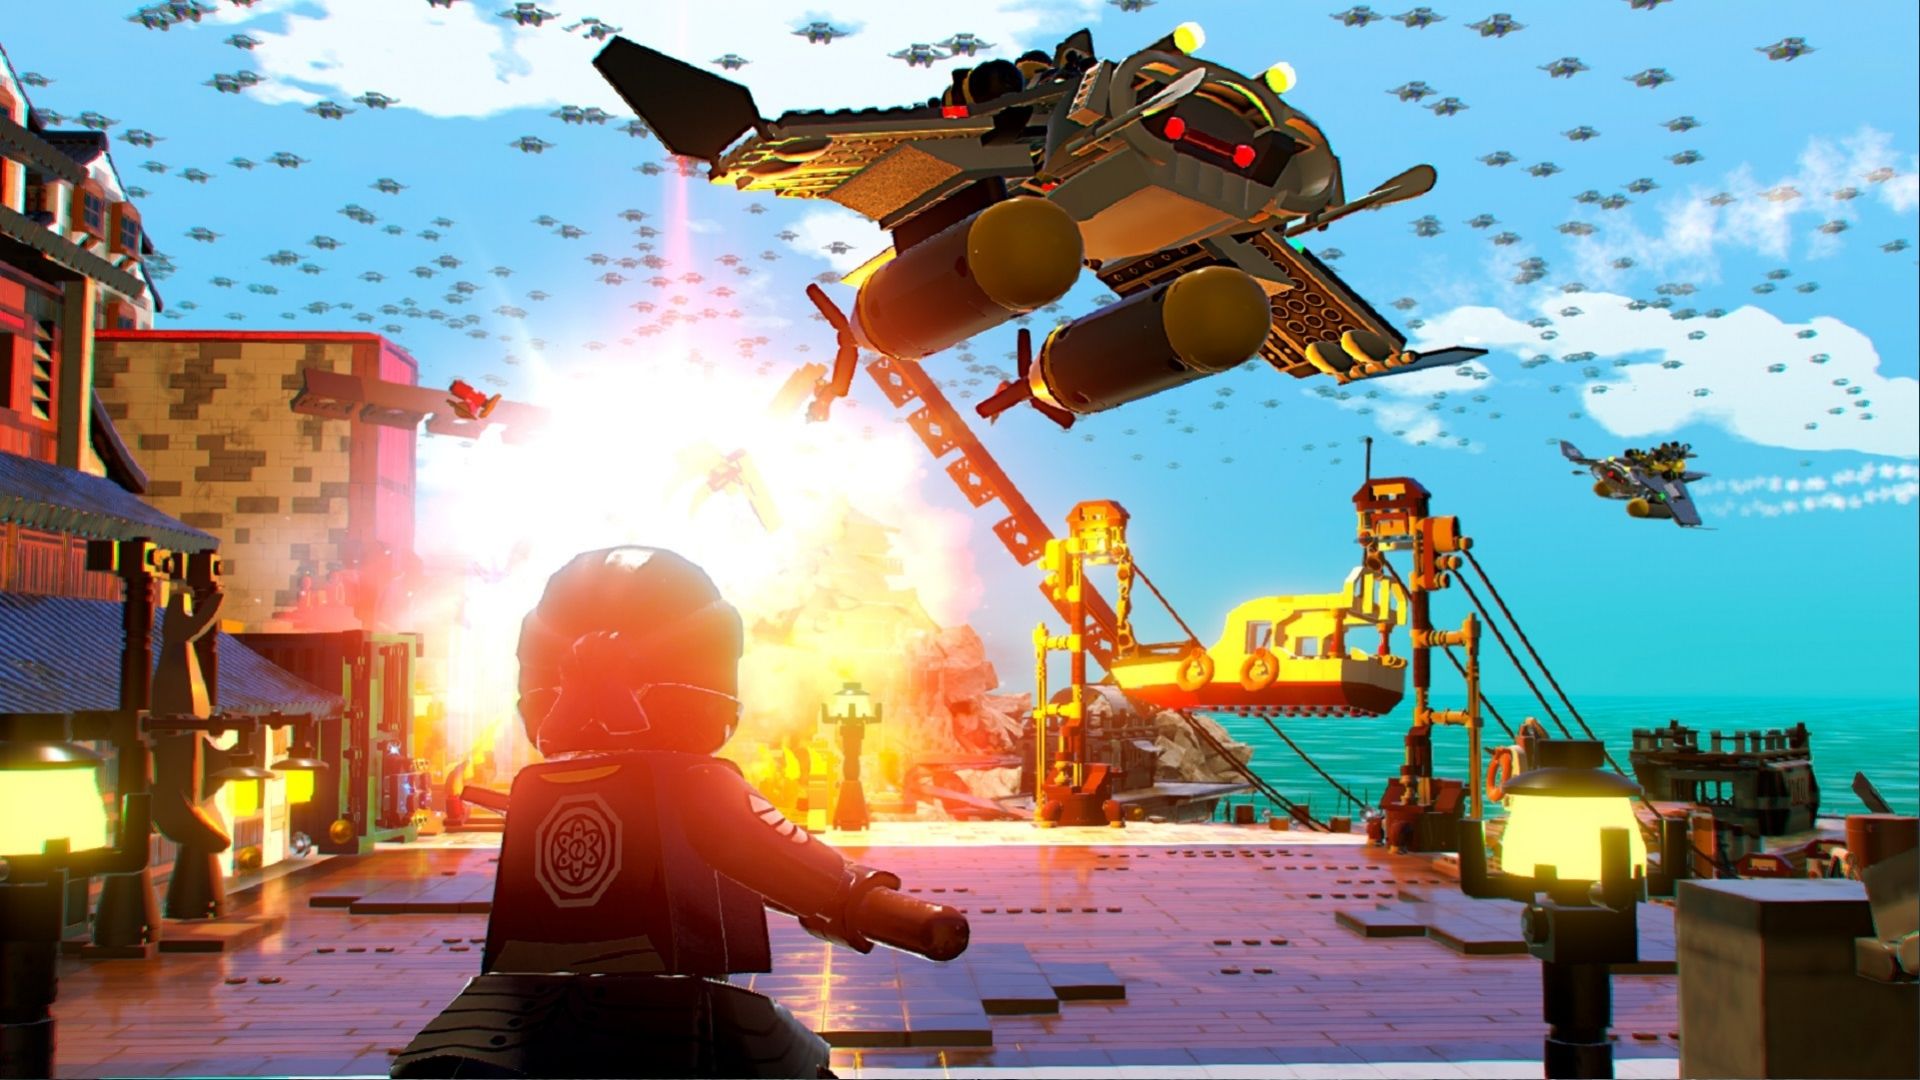 A ninja, one of The LEGO Ninjago characters, looking into the sky at a spaceship as a big explosion goes off behind it.